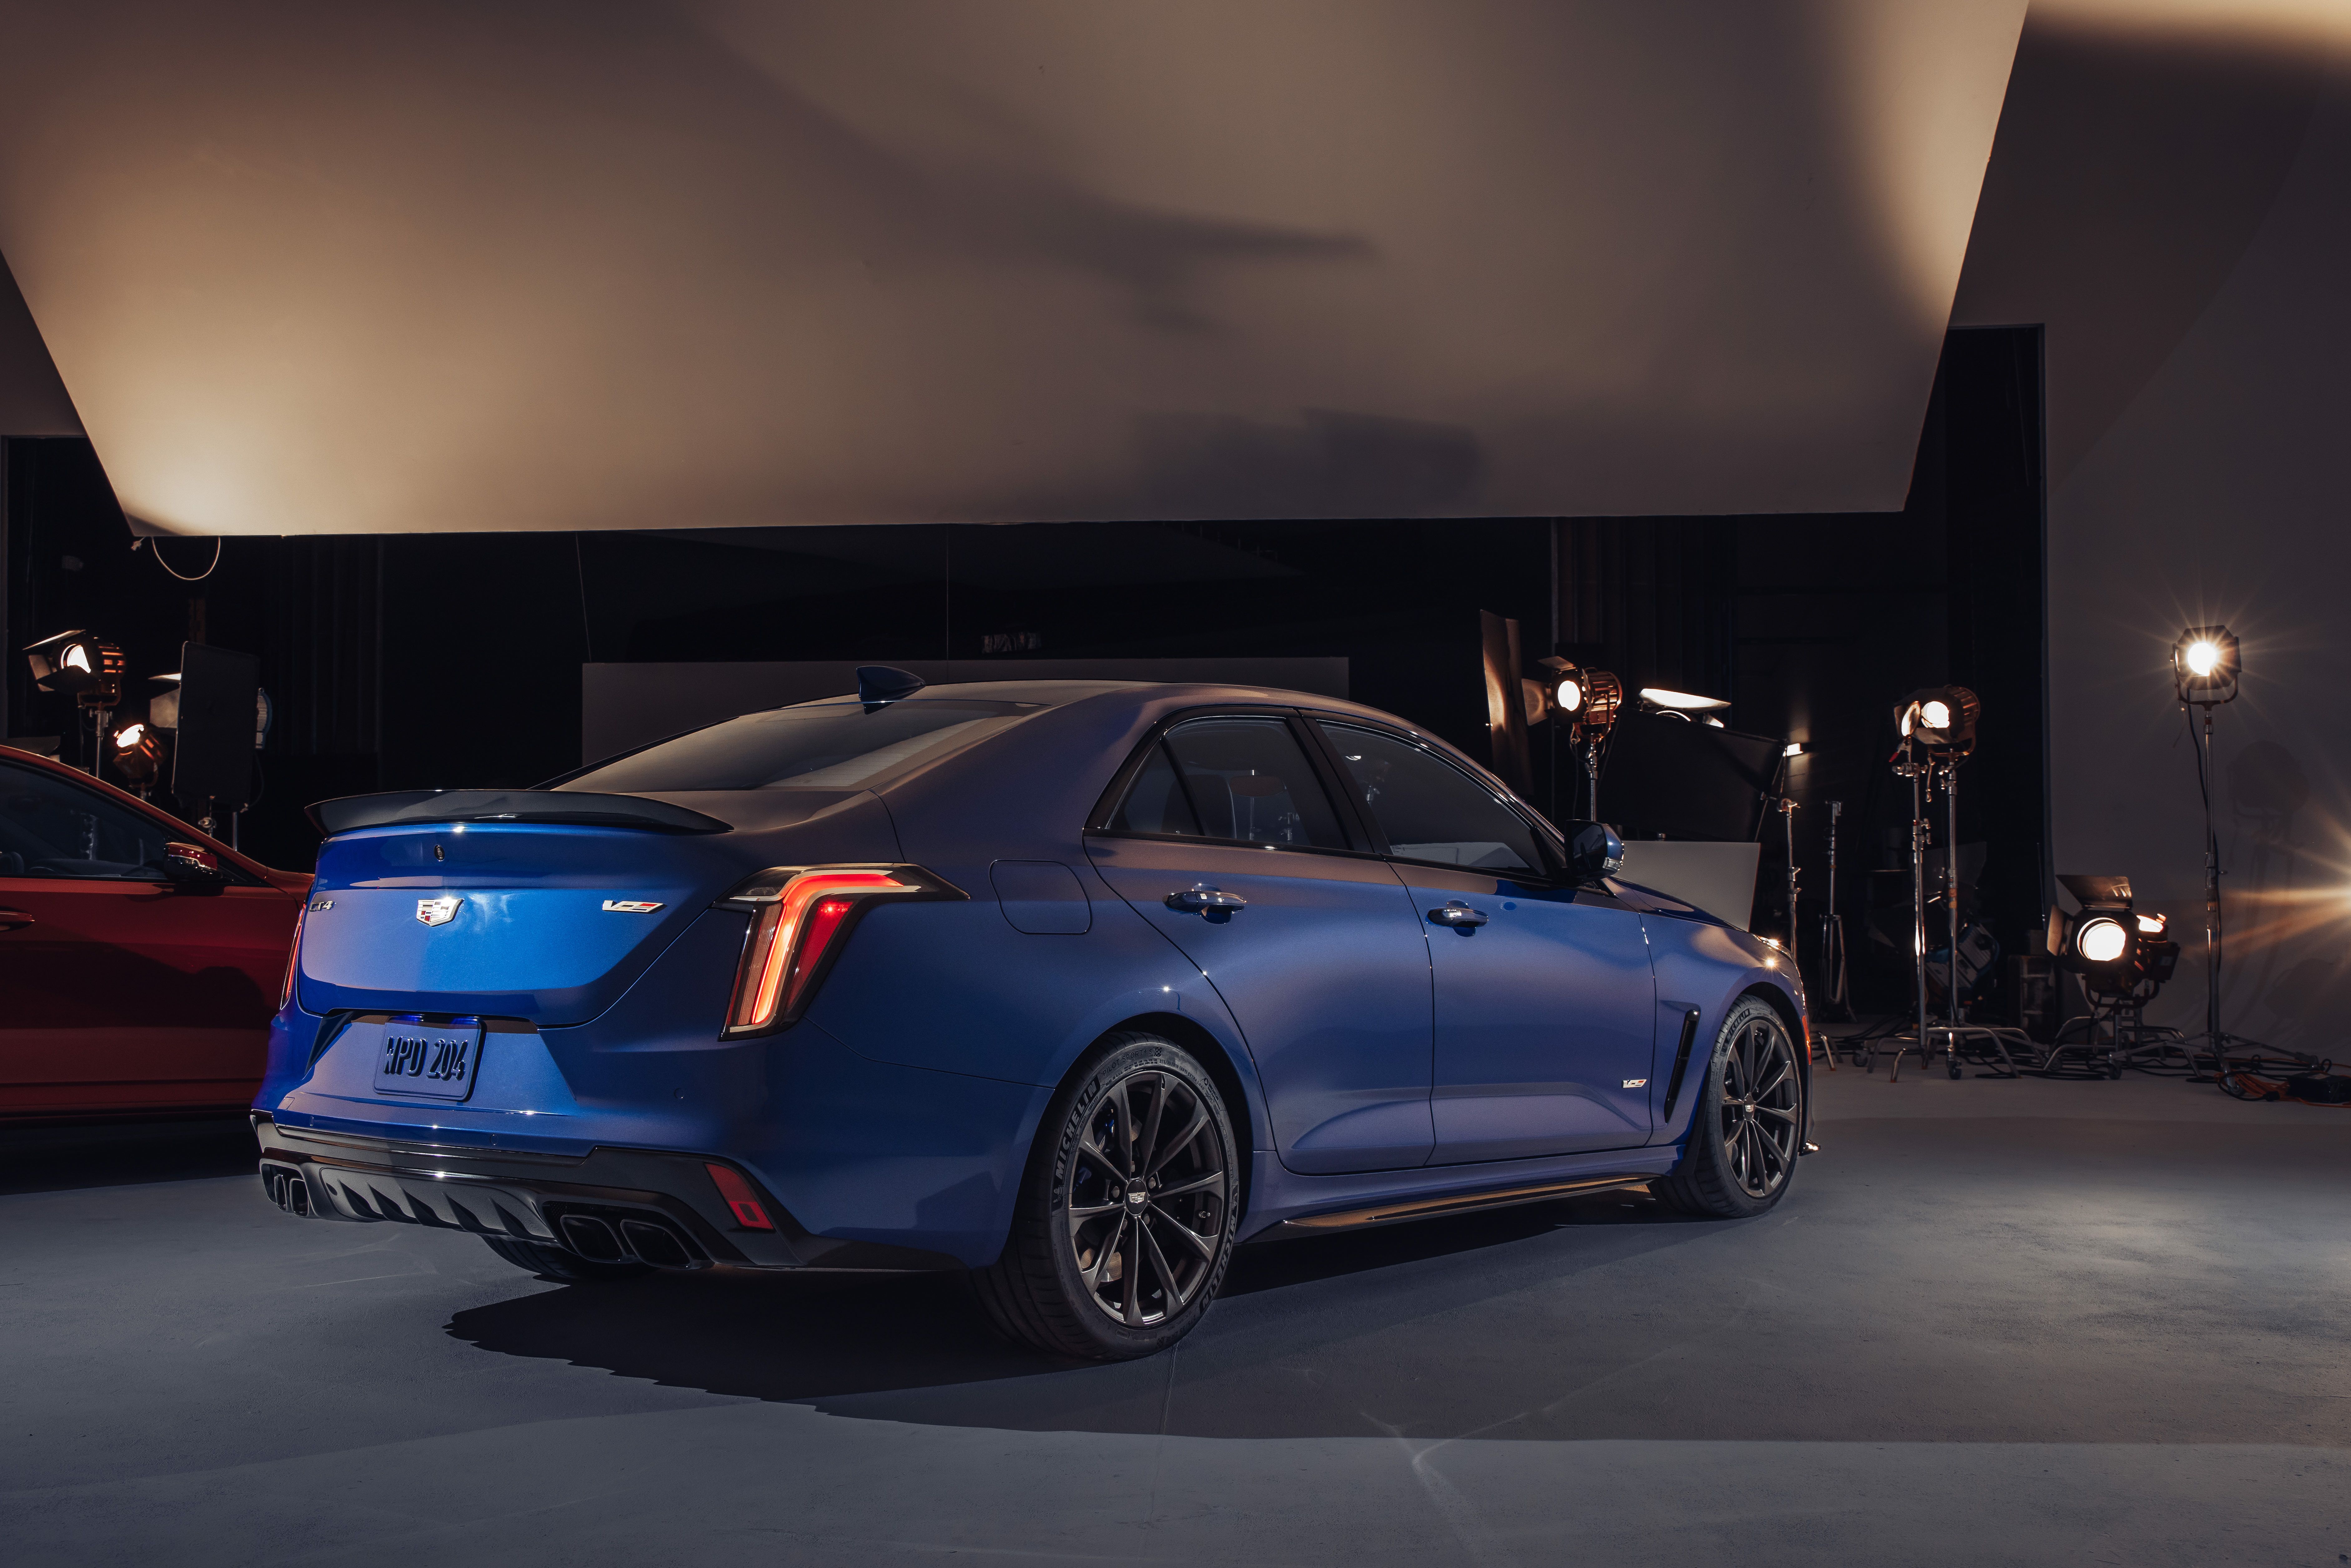 472-HP 2022 Cadillac CT4-V Blackwing Is like an ATS-V, but Better